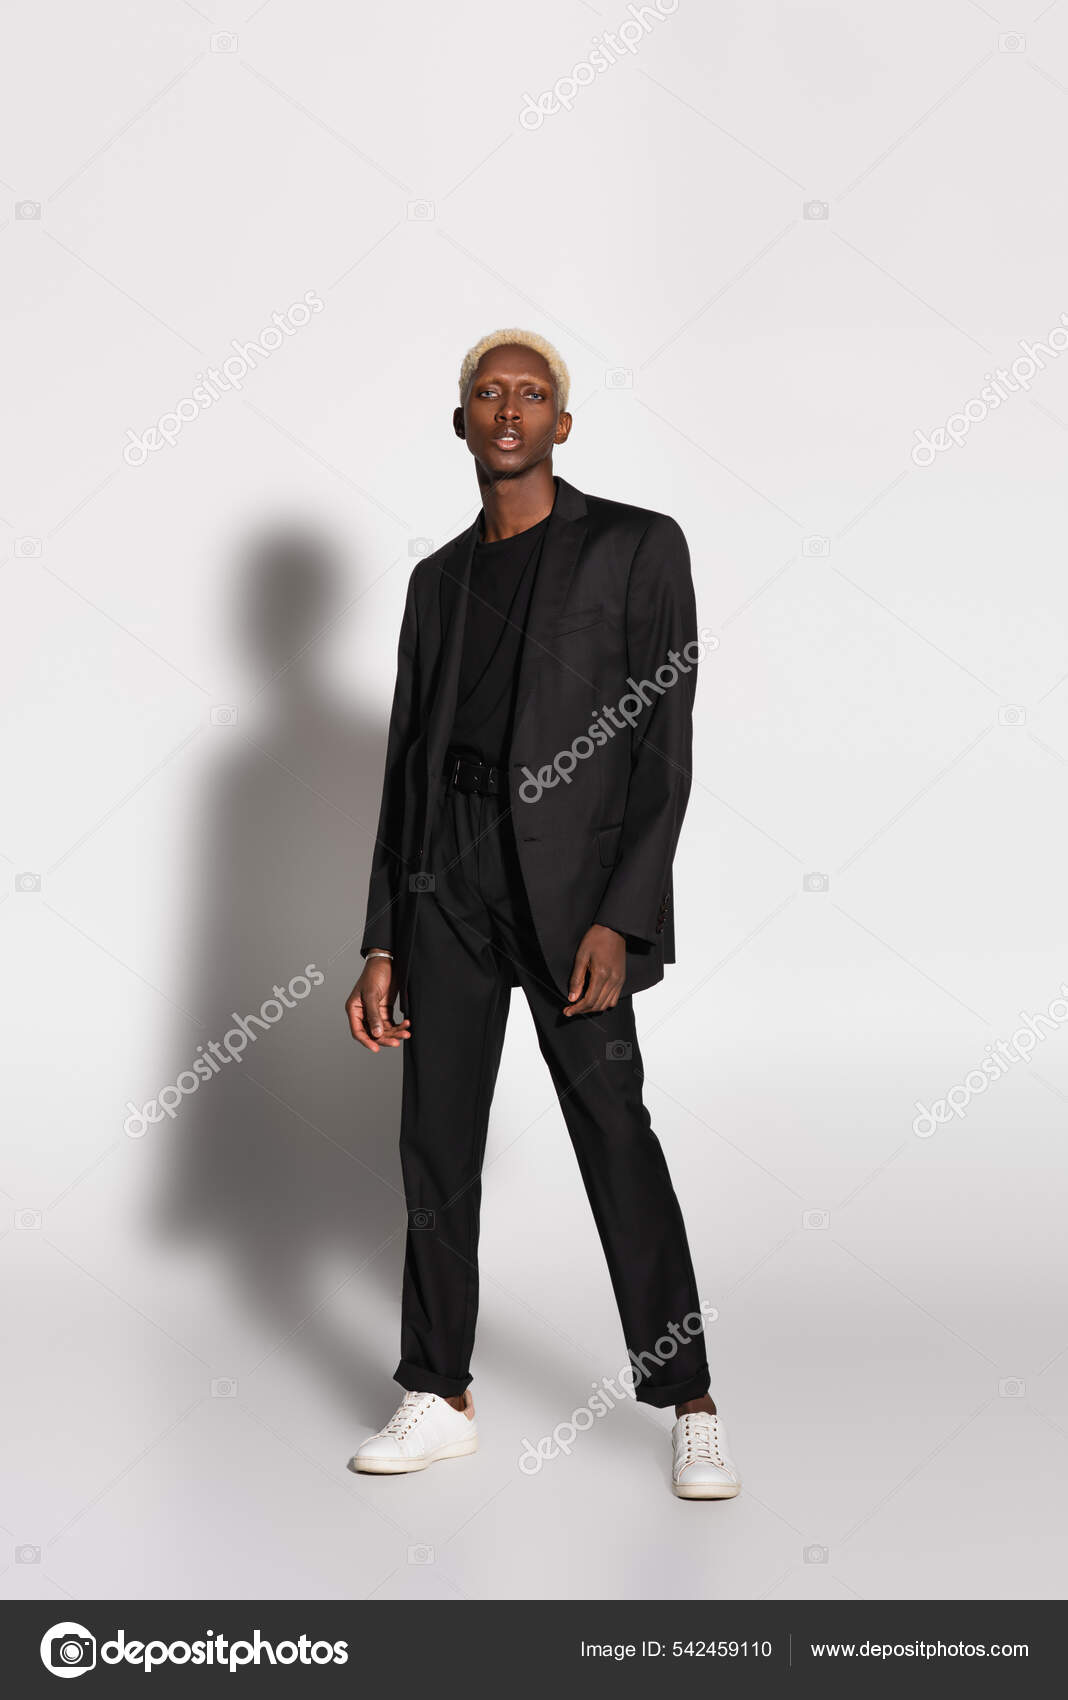 depositphotos 542459110 stock photo full length view african american